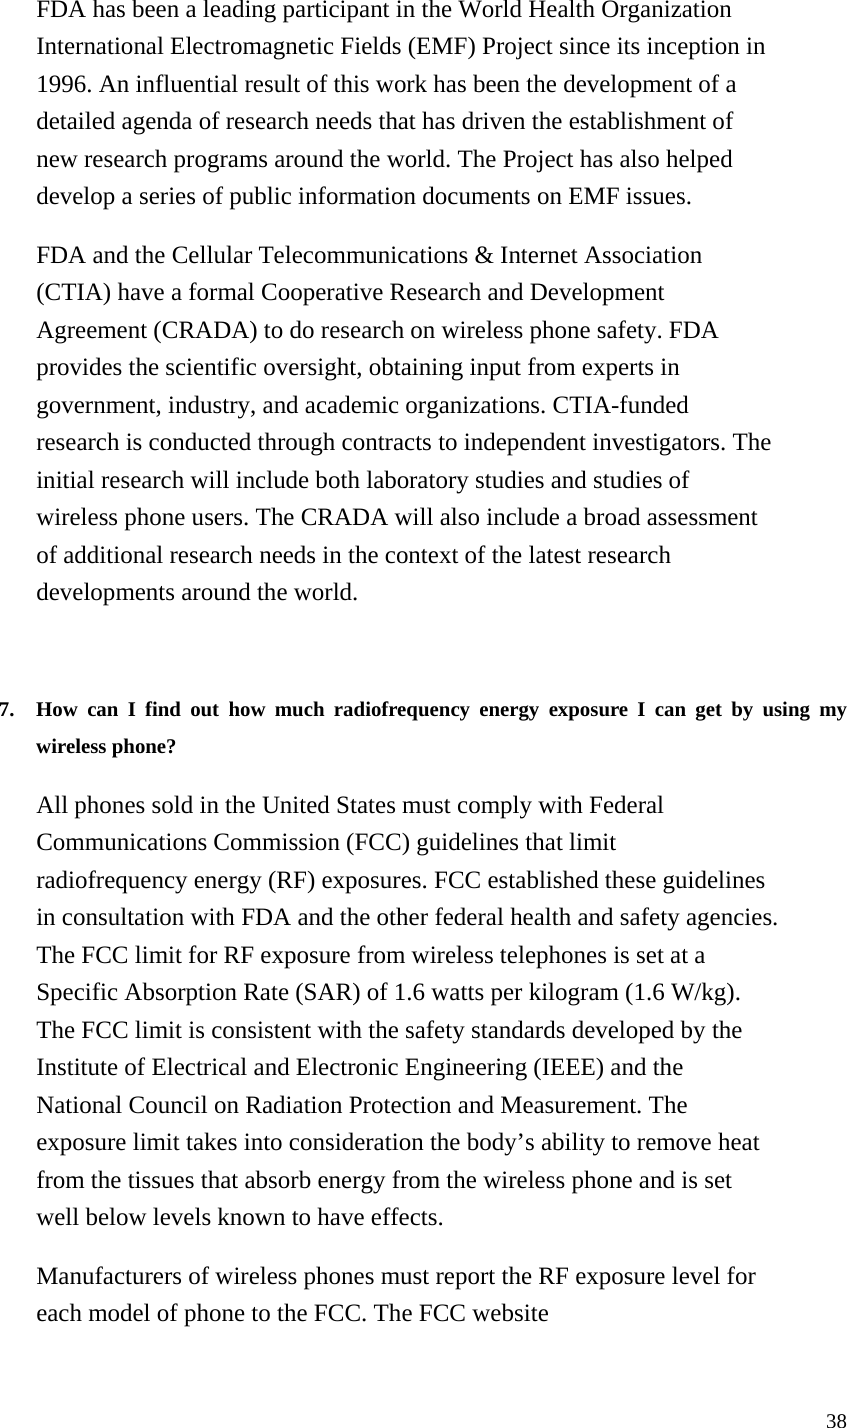 38 FDA has been a leading participant in the World Health Organization International Electromagnetic Fields (EMF) Project since its inception in 1996. An influential result of this work has been the development of a detailed agenda of research needs that has driven the establishment of new research programs around the world. The Project has also helped develop a series of public information documents on EMF issues. FDA and the Cellular Telecommunications &amp; Internet Association (CTIA) have a formal Cooperative Research and Development Agreement (CRADA) to do research on wireless phone safety. FDA provides the scientific oversight, obtaining input from experts in government, industry, and academic organizations. CTIA-funded research is conducted through contracts to independent investigators. The initial research will include both laboratory studies and studies of wireless phone users. The CRADA will also include a broad assessment of additional research needs in the context of the latest research developments around the world.   7. How can I find out how much radiofrequency energy exposure I can get by using my wireless phone?   All phones sold in the United States must comply with Federal Communications Commission (FCC) guidelines that limit radiofrequency energy (RF) exposures. FCC established these guidelines in consultation with FDA and the other federal health and safety agencies. The FCC limit for RF exposure from wireless telephones is set at a Specific Absorption Rate (SAR) of 1.6 watts per kilogram (1.6 W/kg). The FCC limit is consistent with the safety standards developed by the Institute of Electrical and Electronic Engineering (IEEE) and the National Council on Radiation Protection and Measurement. The exposure limit takes into consideration the body’s ability to remove heat from the tissues that absorb energy from the wireless phone and is set well below levels known to have effects. Manufacturers of wireless phones must report the RF exposure level for each model of phone to the FCC. The FCC website 